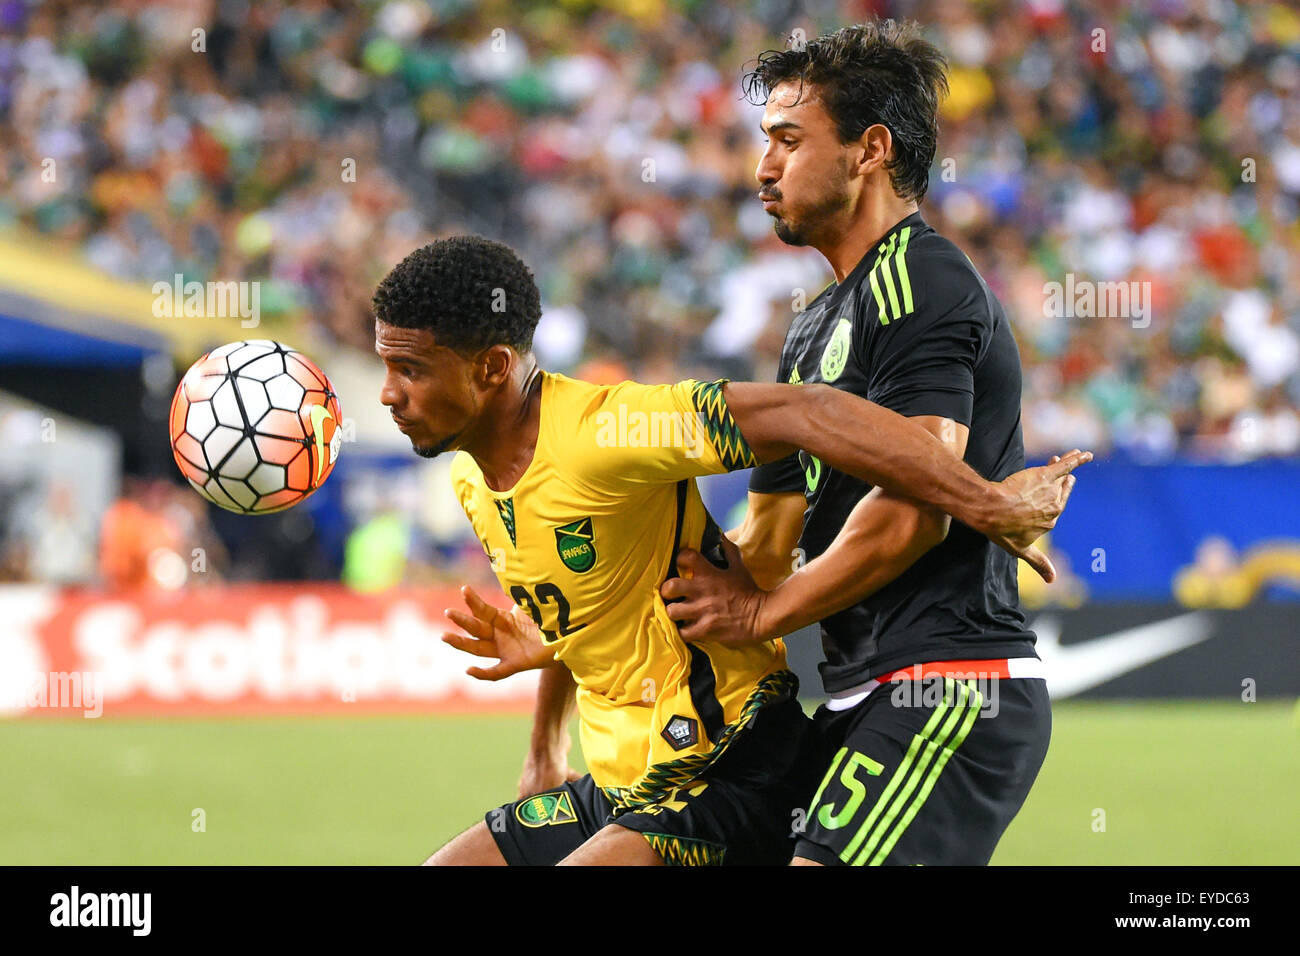 Philadelphia, Pennsylvania, USA. 26th July, 2015. Jamaica midfielder Garath McClearly #22 and Mexico defender Hector Moreno #15 battle for a loose ball during the 2015 CONCACAF Gold Cup final between Jamaica and Mexico at Lincoln Financial Field in Philadelphia, Pennsylvania. Mexico defeated Jamaica 3-1. Rich Barnes/CSM/Alamy Live News Stock Photo